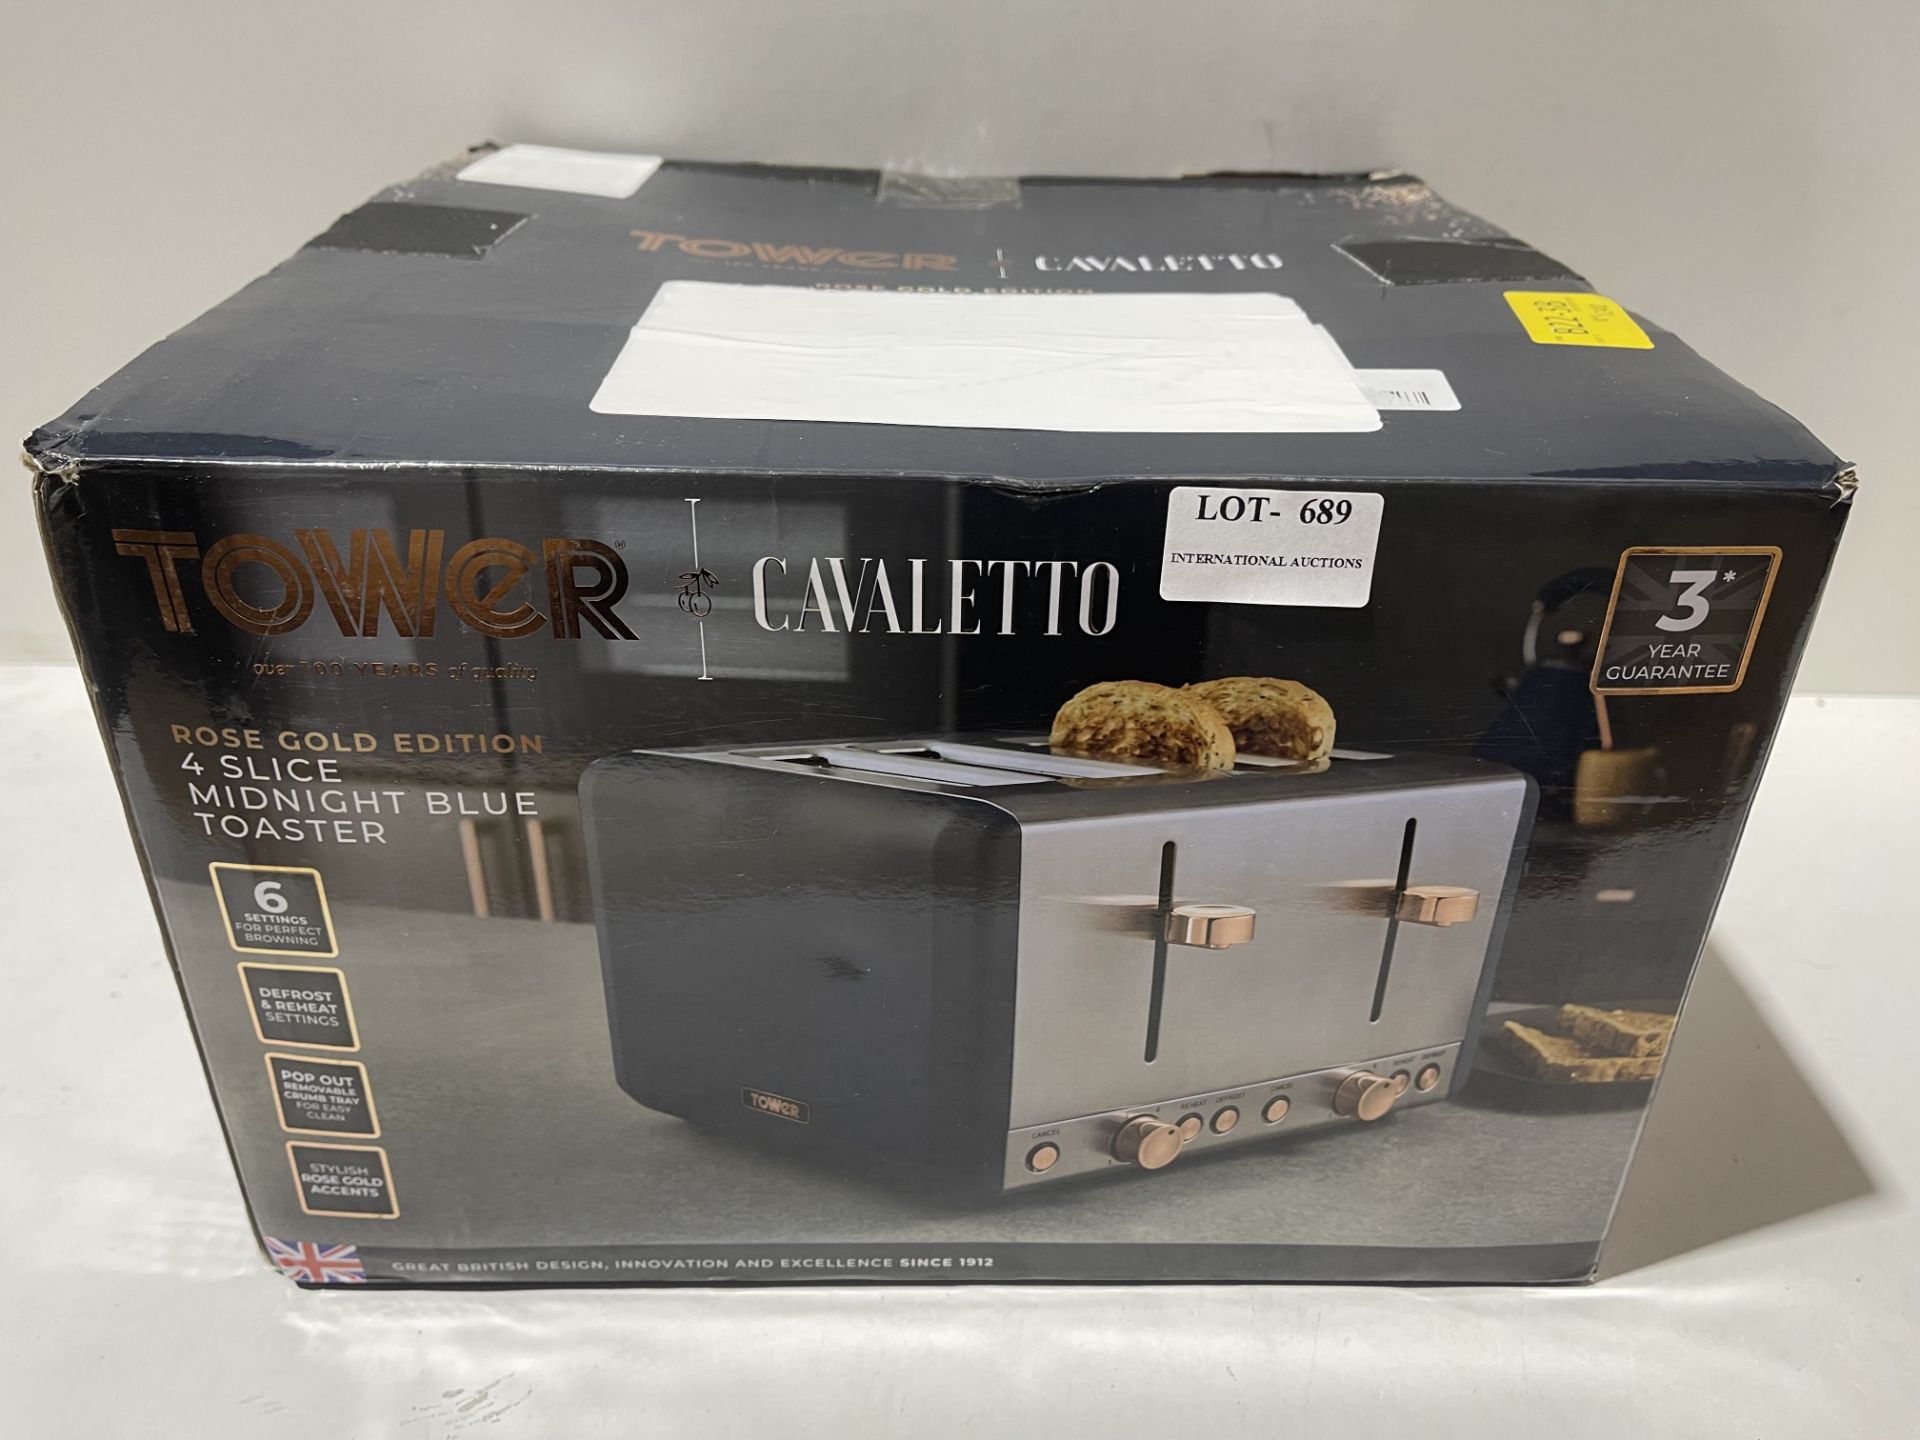 Tower T20051MNB Cavaletto 4-Slice Toaster with Defrost/Reheat, Stainless Steel, 1800 W, Midnight